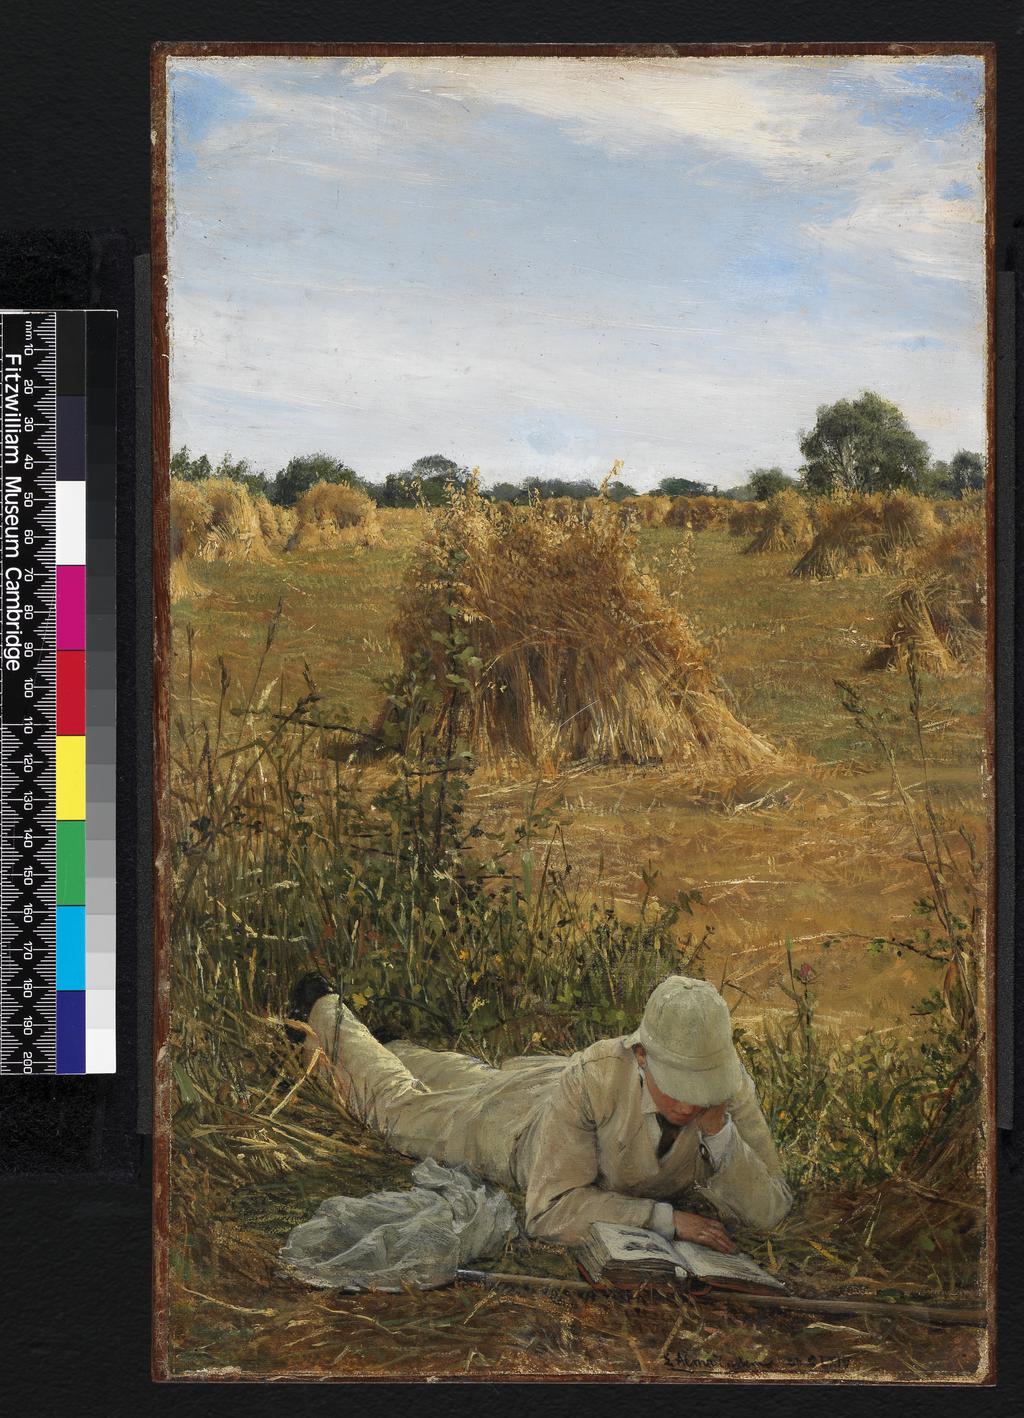 An image of 94 Degrees in the Shade. Alma-Tadema, Lawrence (British, 1836-1912). Oil on canvas laid down on panel, height 35.3 cm, width 21.6 cm, 1876. Notes: The scene shows a cornfield at Godstone, Surrey, with the donor, at that date aged seventeen, lying in the foreground.